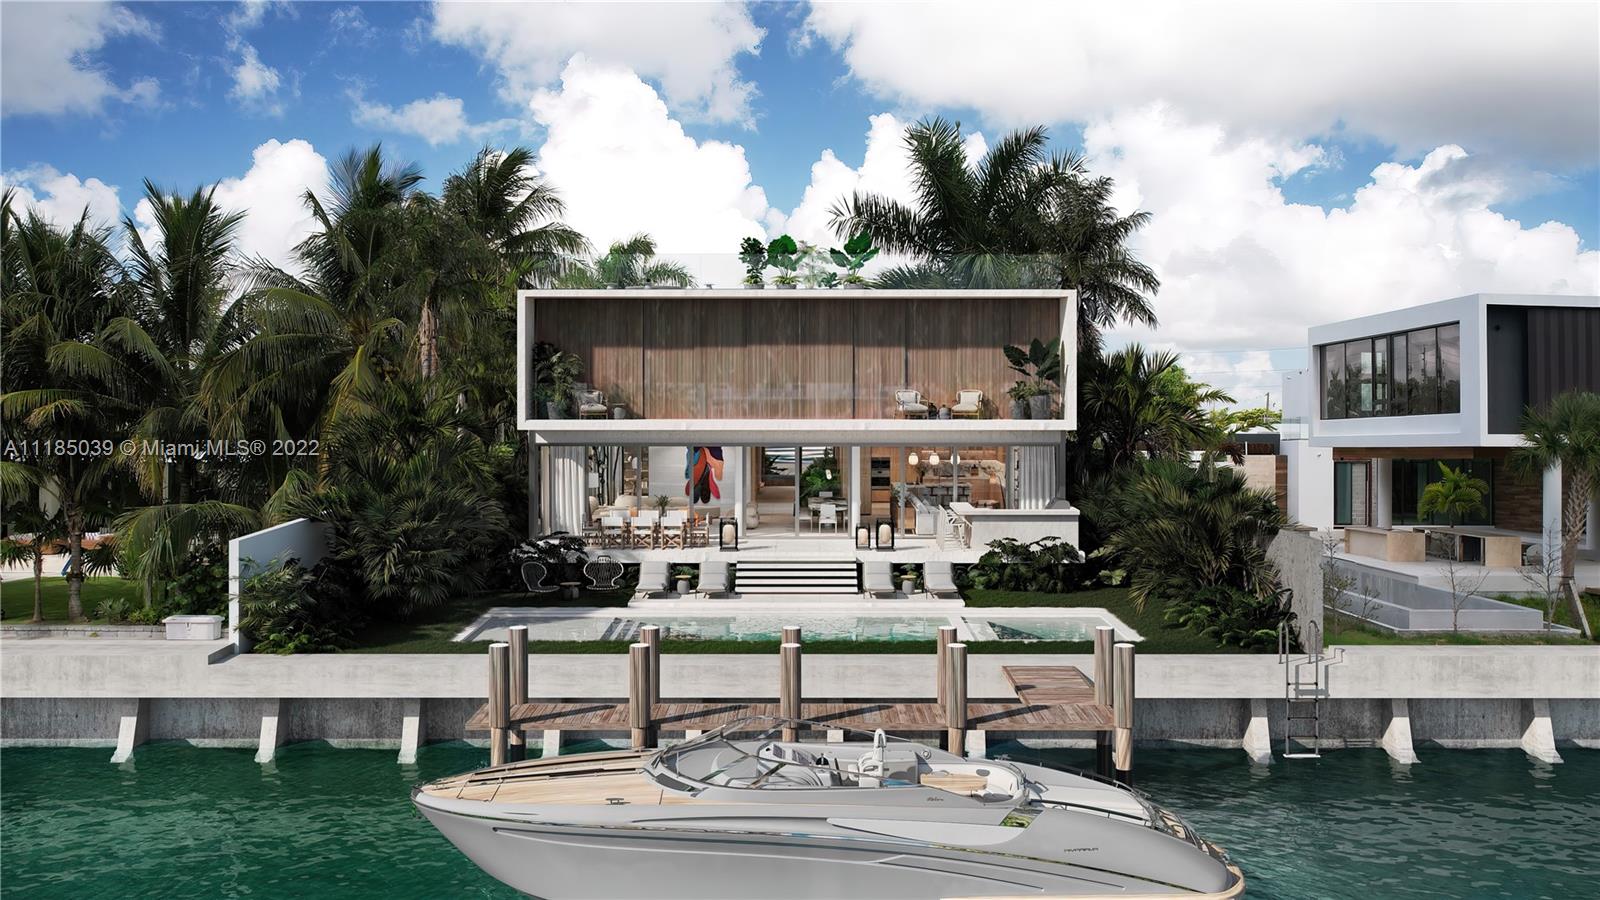 This new construction oasis will feature 7 bedrooms, 7.5 bathrooms, plus a den, rooftop garden, 4 car garage, pool with a jacuzzi and a private boat lift on 75 feet of water, 6,161.20 SQ.FT under A/C, 7,415.06 SQ.FT adjusted, and total construction area of 9,522.37 SQ.FT. The new owner of this gorgeous home will get to relish in the opportunity to work with the renowned interior designer Margaret Bissu (ranked #14 Latin Americas by Architectural Digest), who has customized this home with a selection of textures, materials and furniture, that will compliment the architect’s vision to perfection (made by renowned architect, Simón Bissu Bazbaz). All furniture is negotiable. Expected completion: Summer 2023--get ready for sunshine, entertaining and living lavishly in your very own paradise.